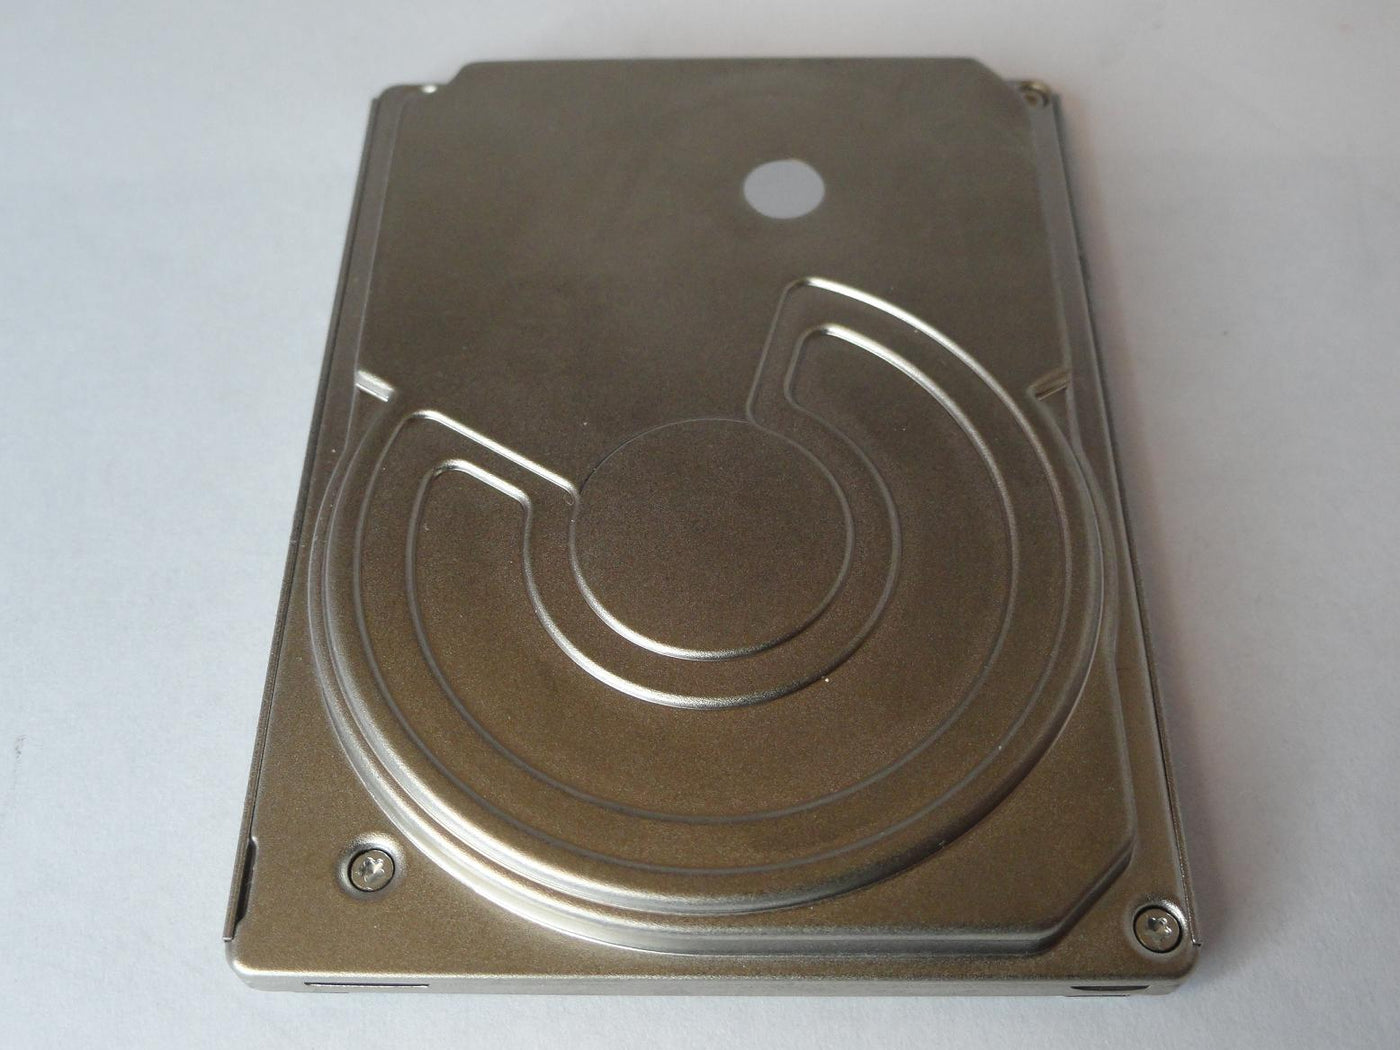 PR23017_HDD1764_Toshiba Dell 80Gb ZIF 4200rpm 1.8in HDD - Image2